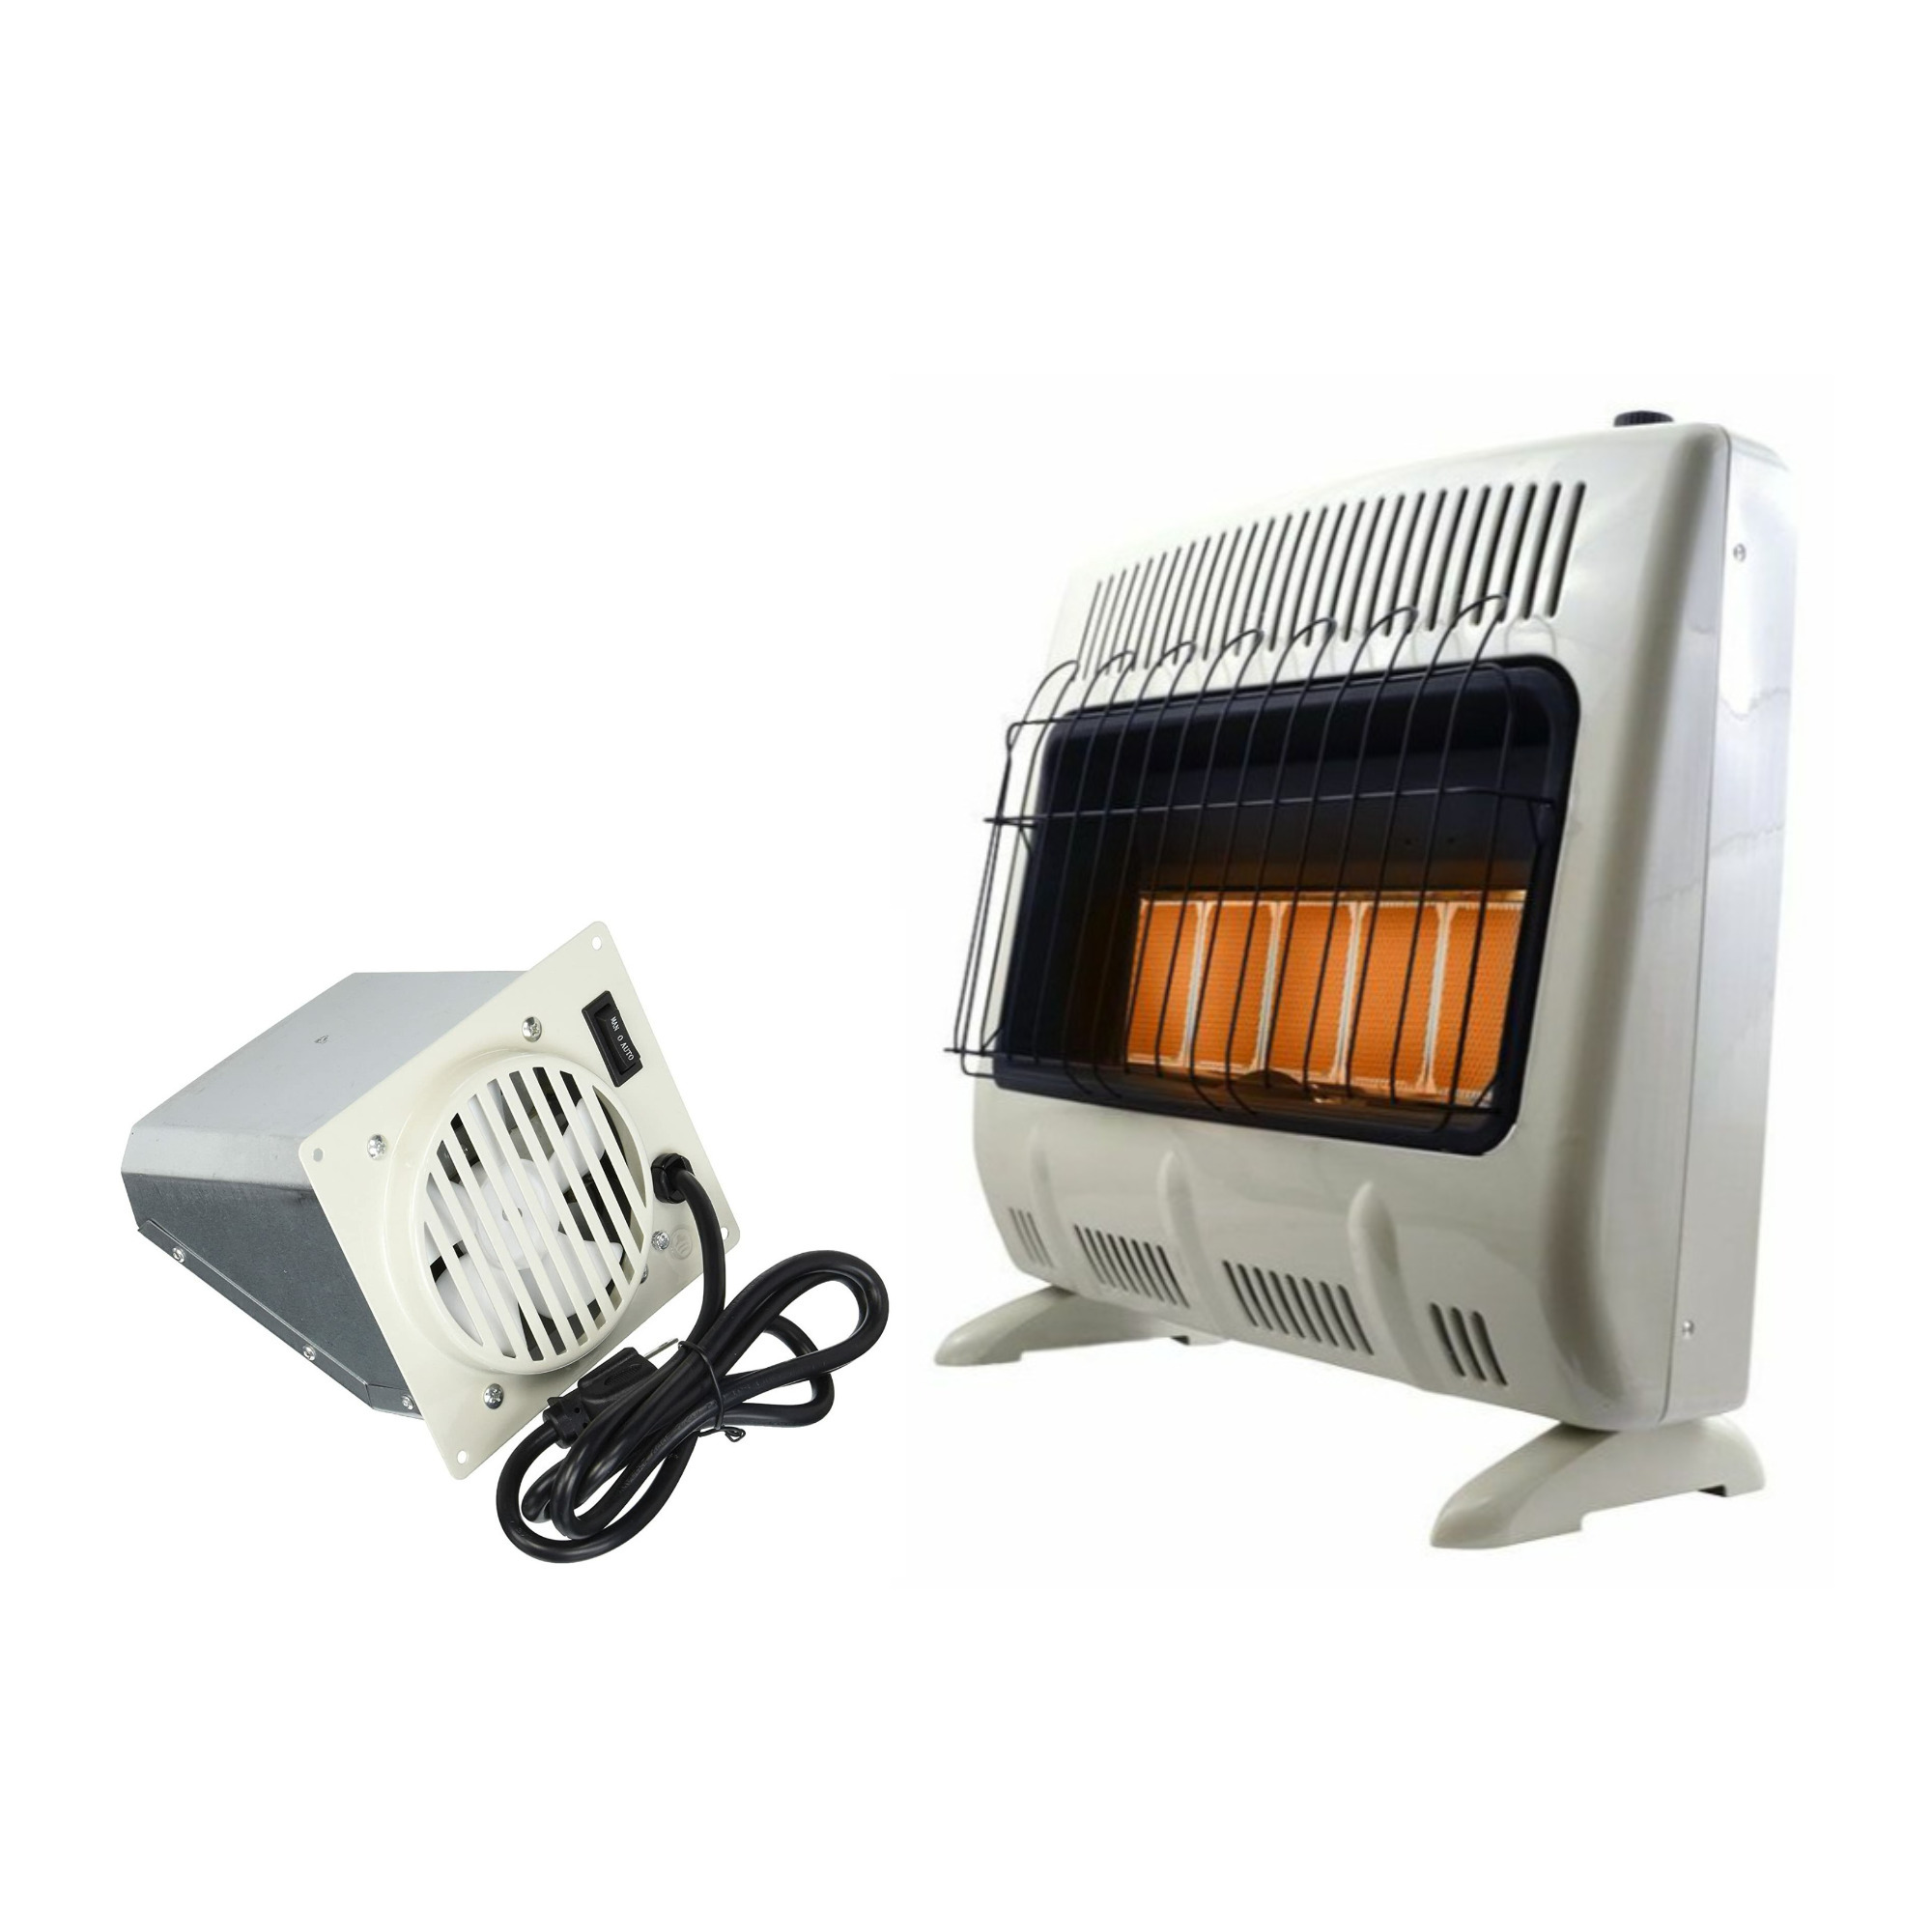 Mr. Heater Vent Free 30,000 BTU Radiant Natural Gas Heater with Fan Blower